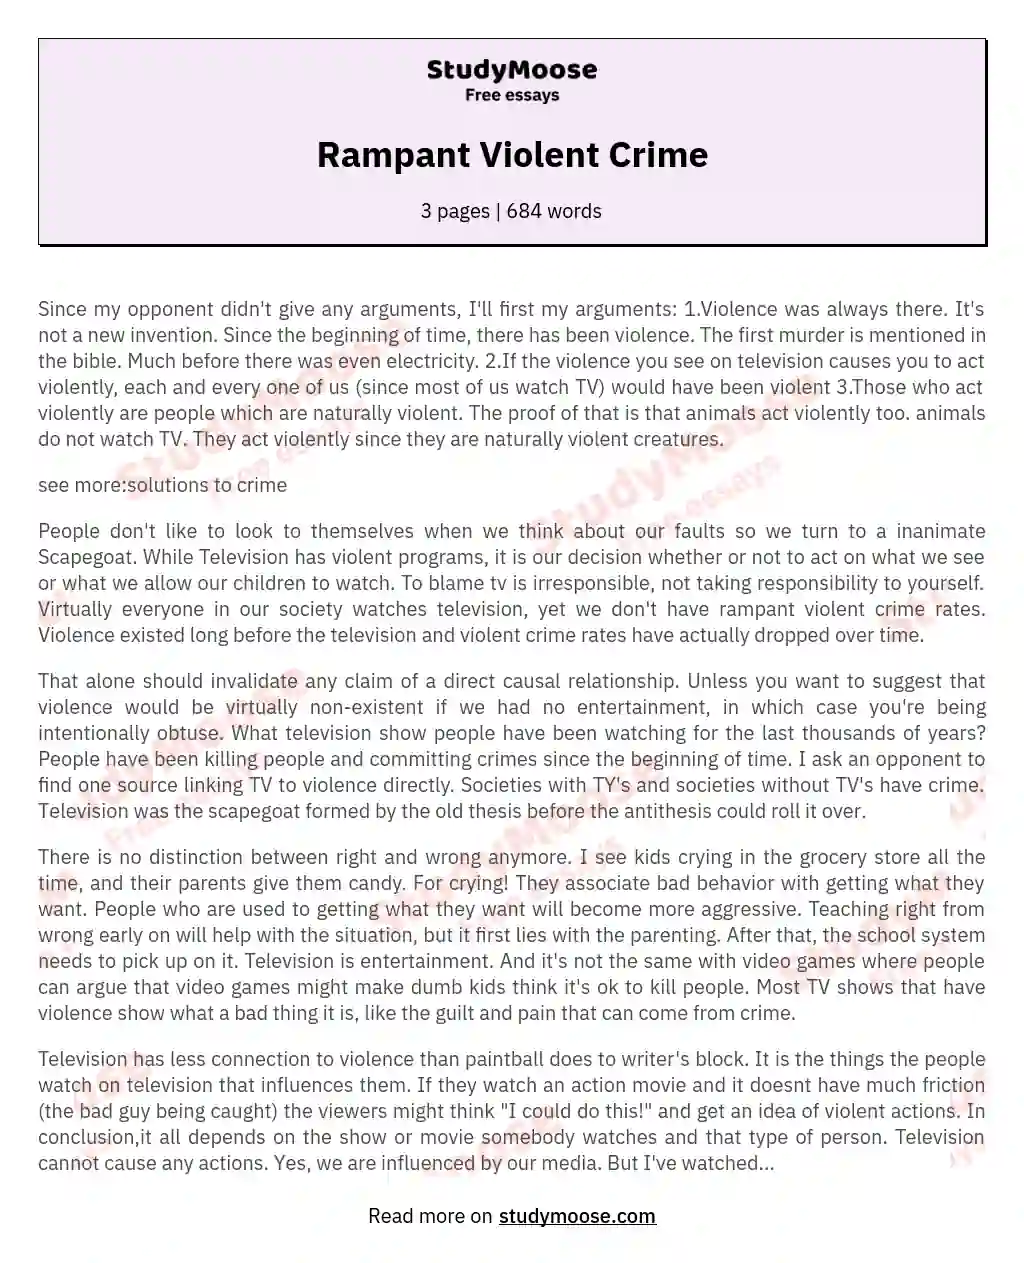 violence and crime essay